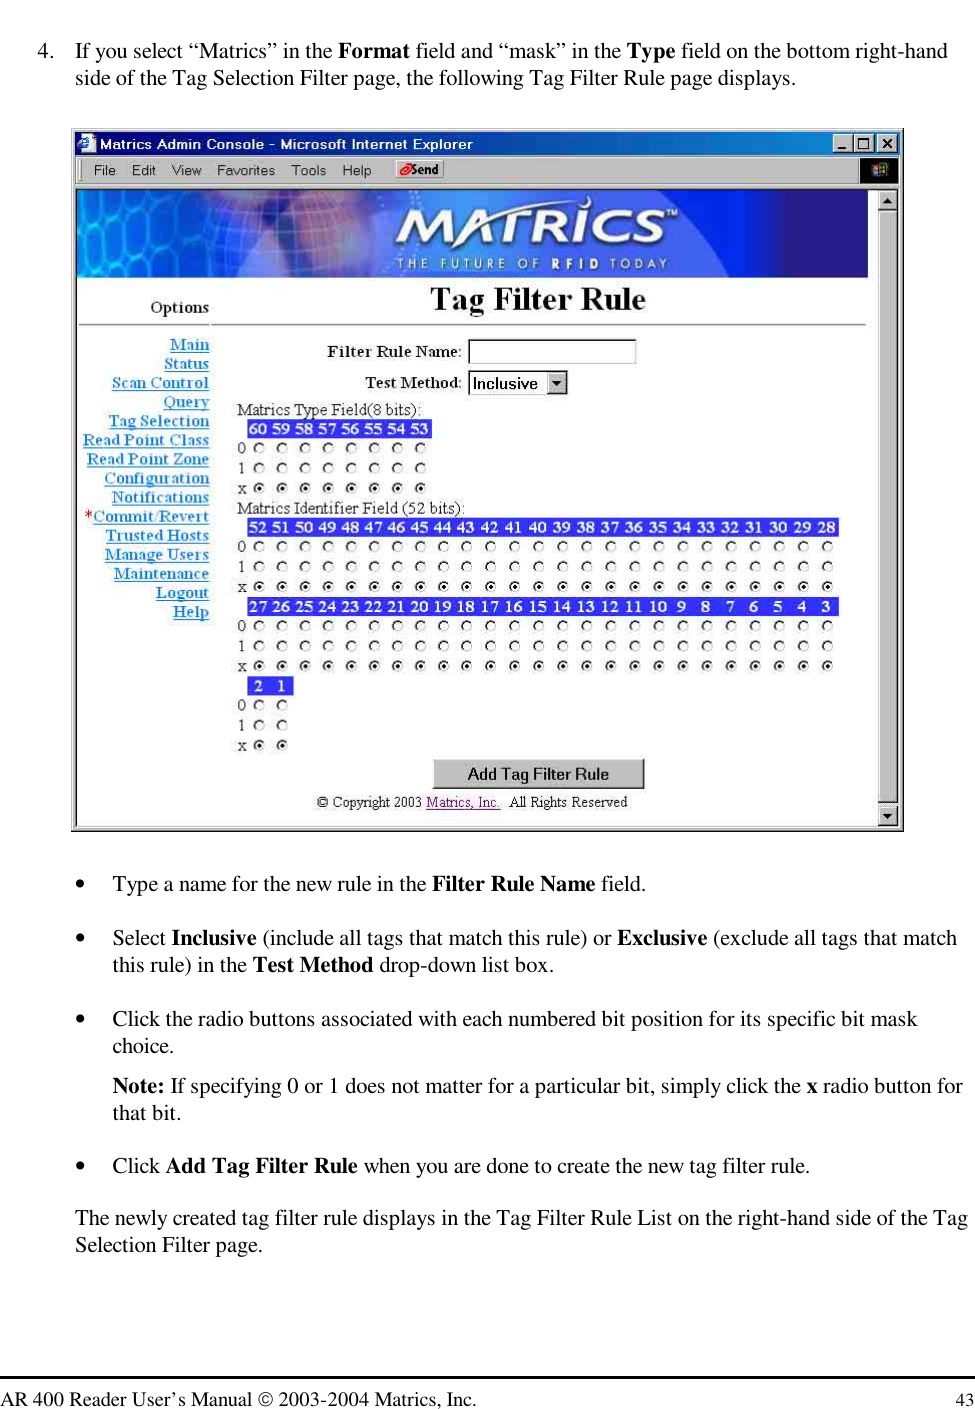   AR 400 Reader User’s Manual  2003-2004 Matrics, Inc.  43 4.  If you select “Matrics” in the Format field and “mask” in the Type field on the bottom right-hand side of the Tag Selection Filter page, the following Tag Filter Rule page displays.   •  Type a name for the new rule in the Filter Rule Name field. •  Select Inclusive (include all tags that match this rule) or Exclusive (exclude all tags that match this rule) in the Test Method drop-down list box.  •  Click the radio buttons associated with each numbered bit position for its specific bit mask choice. Note: If specifying 0 or 1 does not matter for a particular bit, simply click the x radio button for that bit. •  Click Add Tag Filter Rule when you are done to create the new tag filter rule. The newly created tag filter rule displays in the Tag Filter Rule List on the right-hand side of the Tag Selection Filter page. 